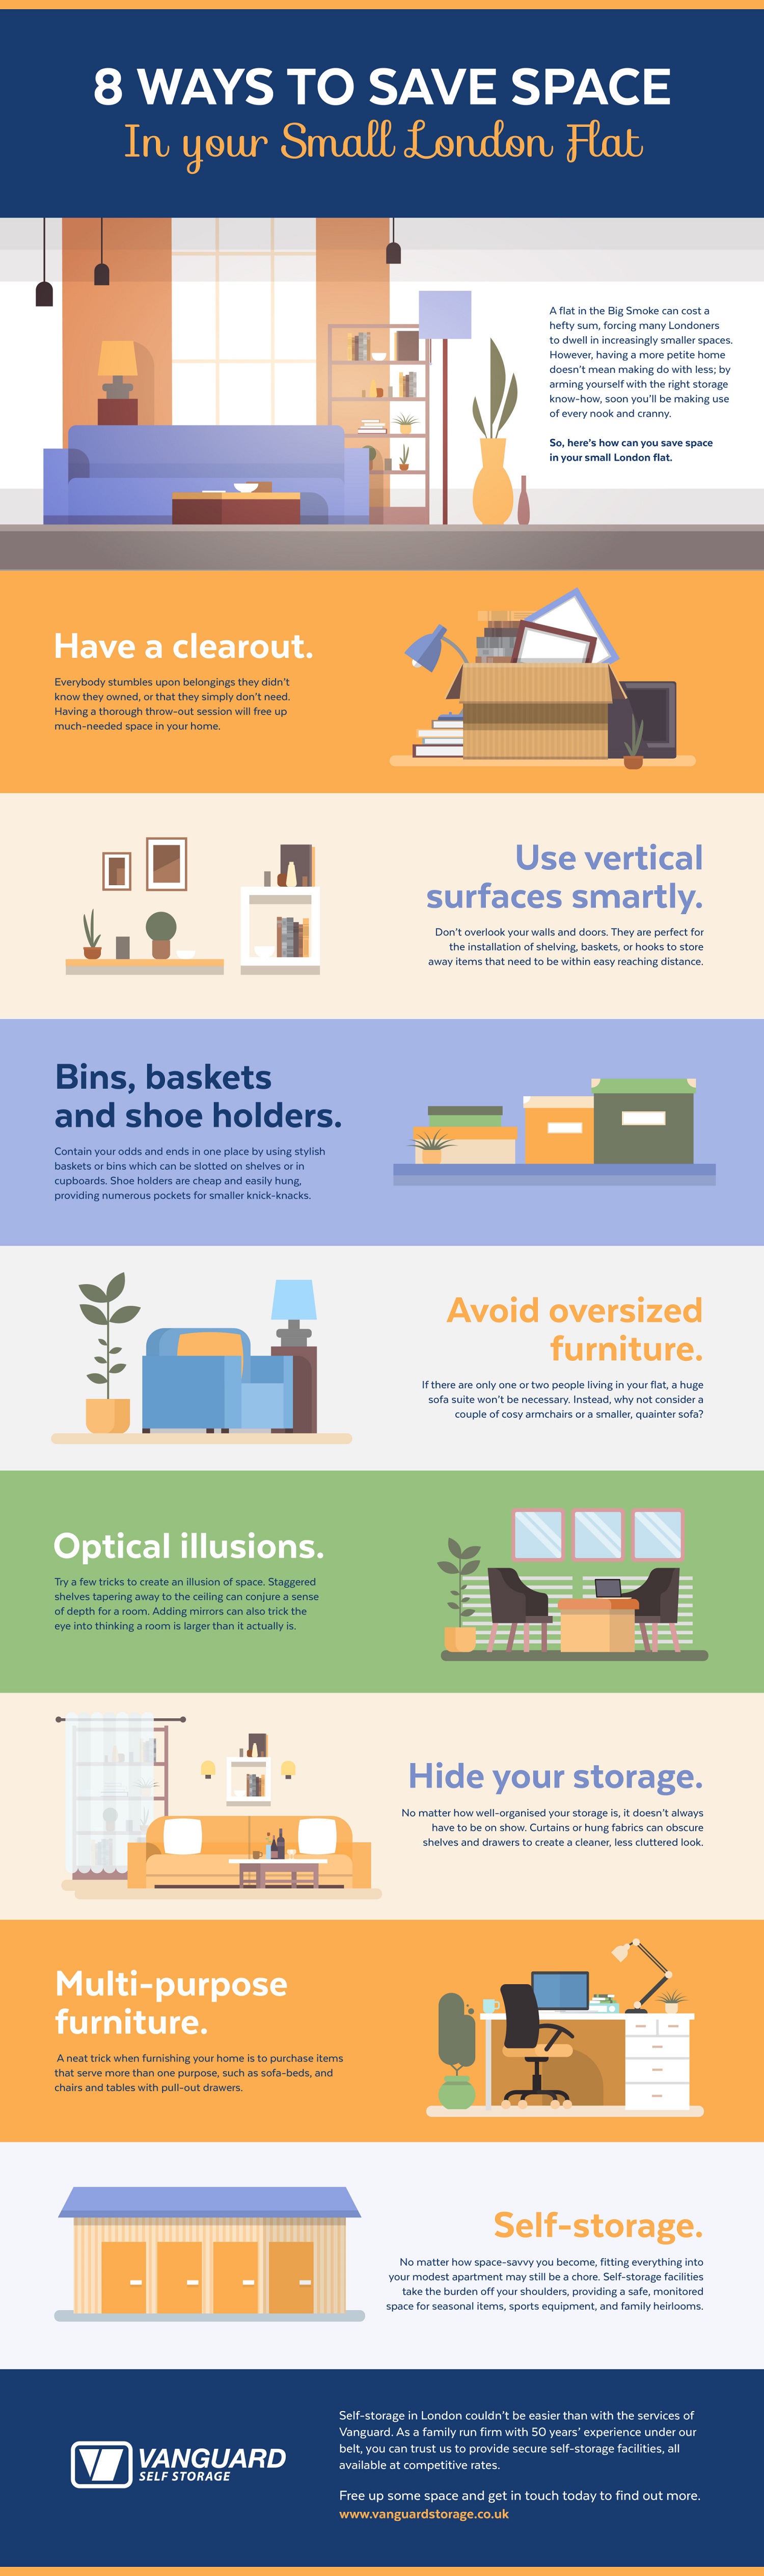 save space in your London flat infographic